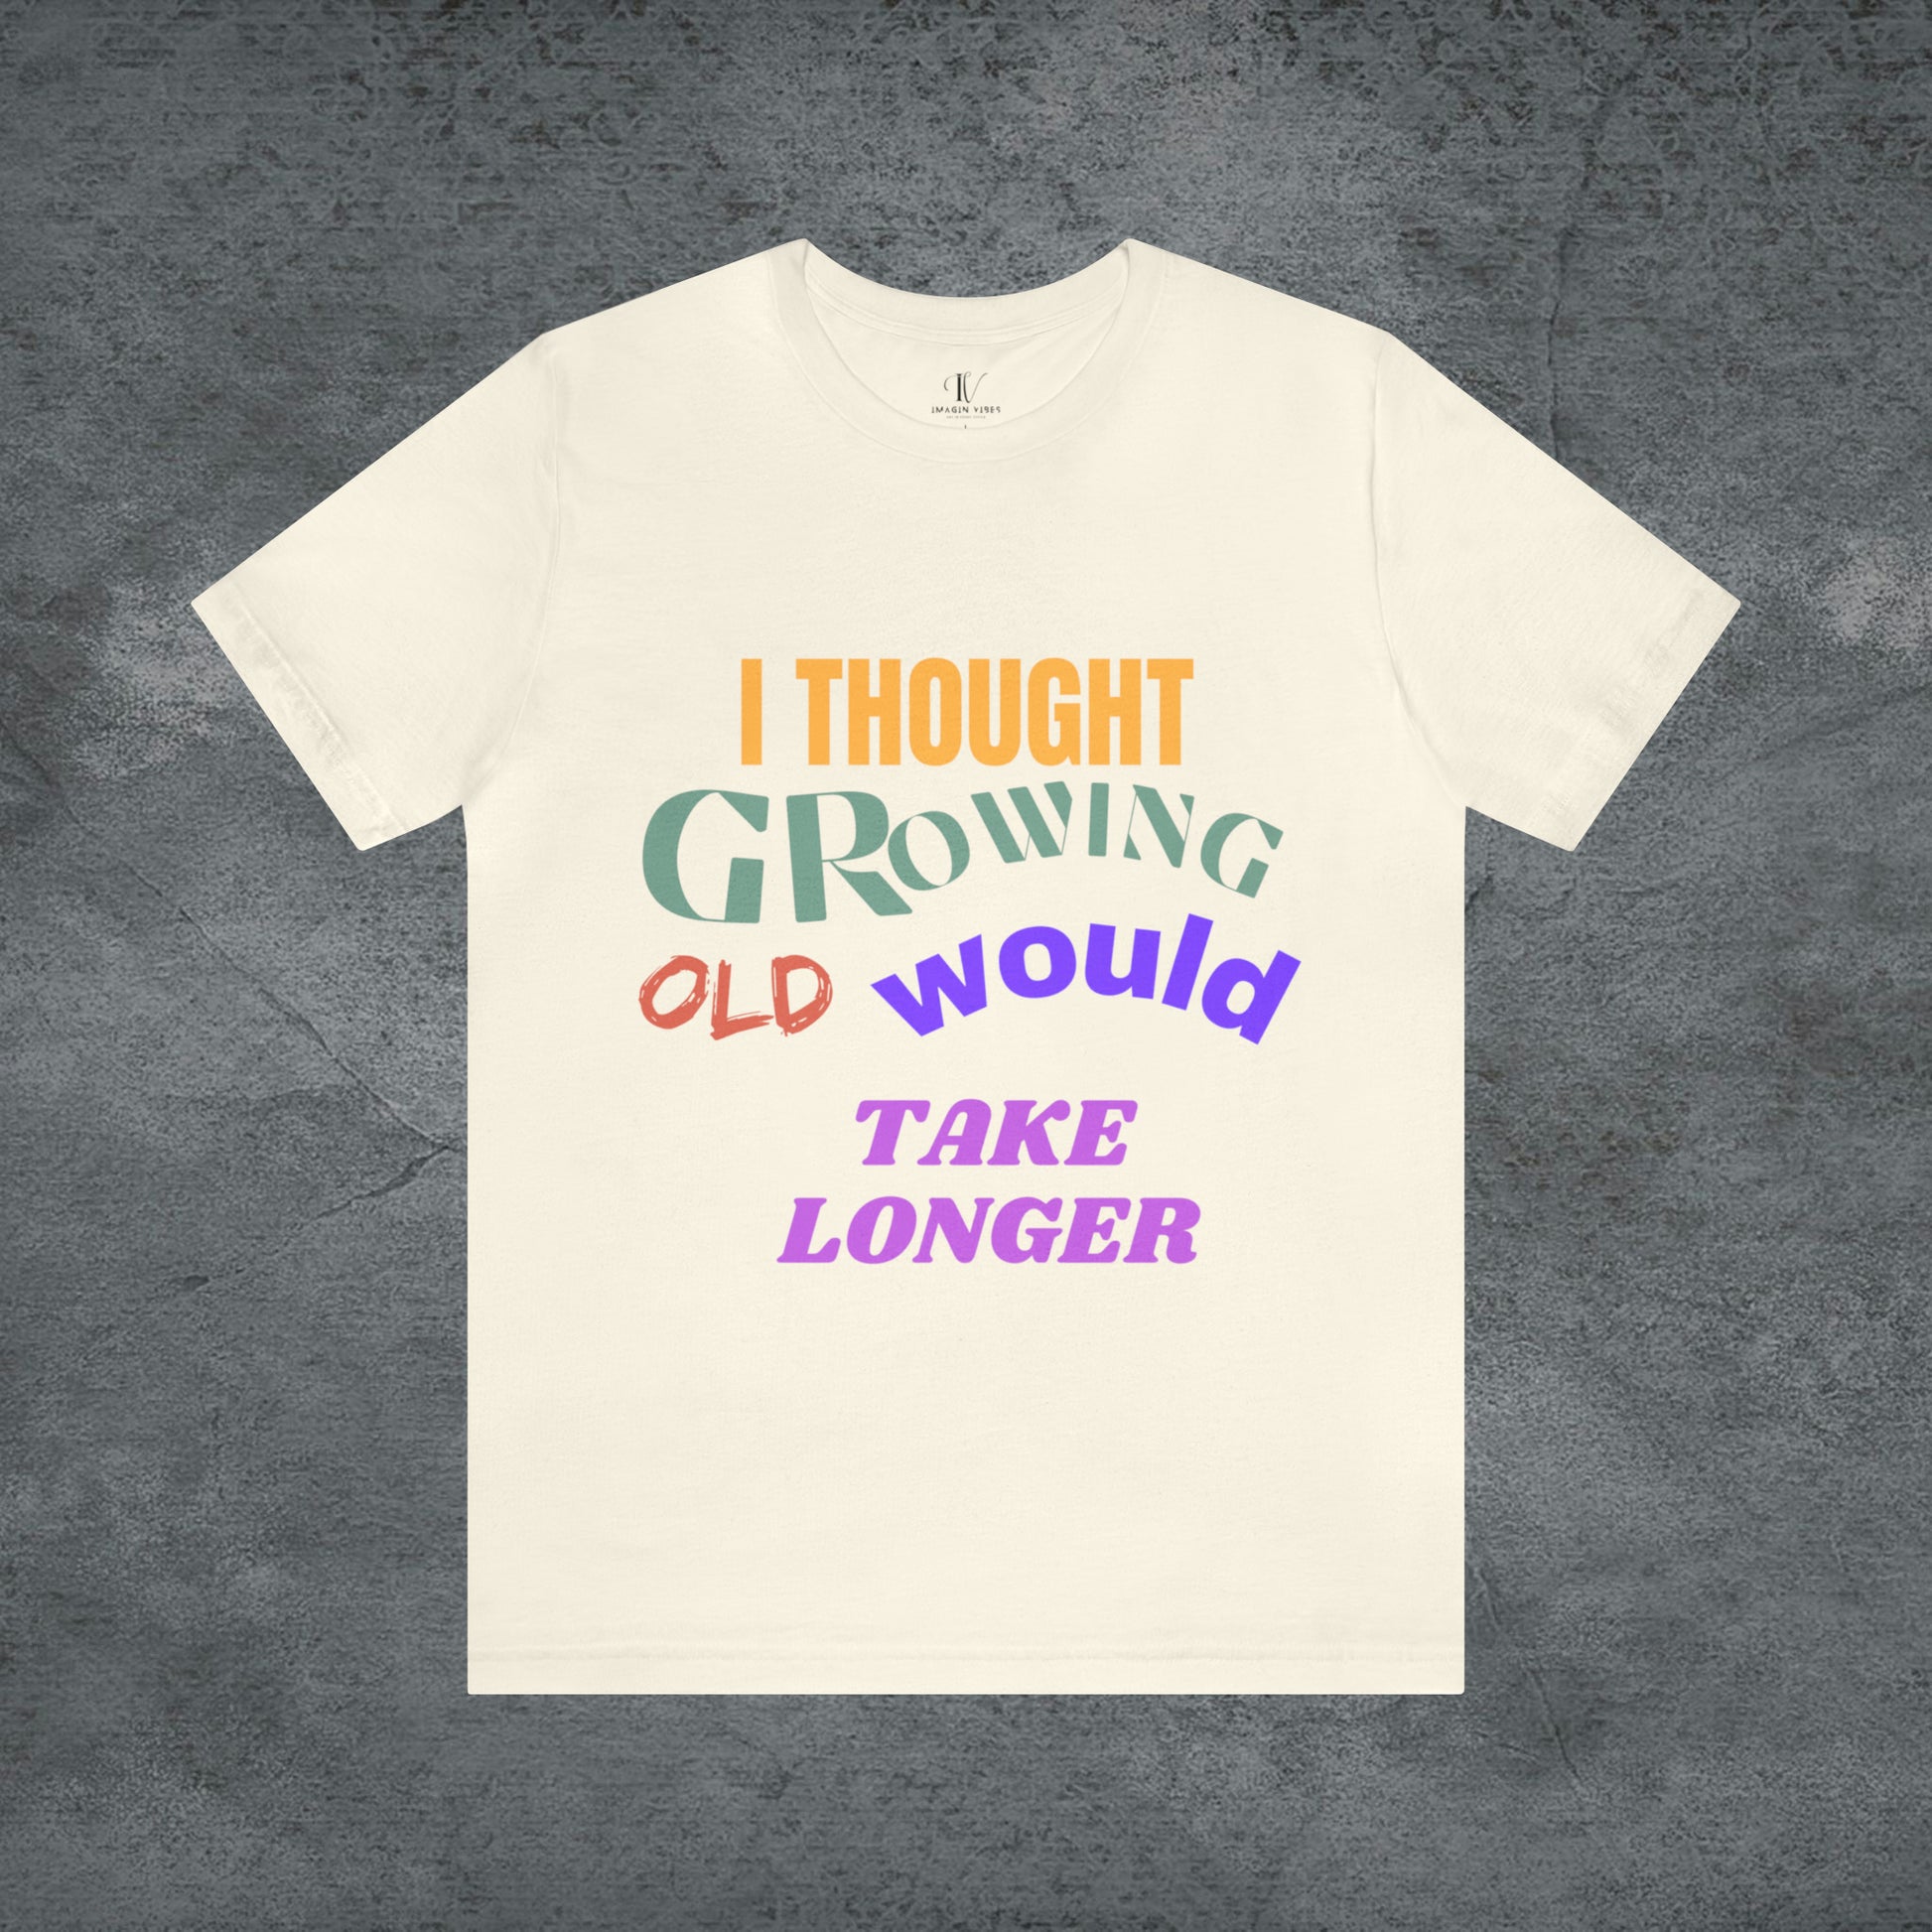 I Thought Growing Old Would Take Longer T-Shirt - Getting Older T-Shirt - Funny Adulting Tee - Old Age T-Shirt - Old Person T-Shirt T-Shirt Natural S 